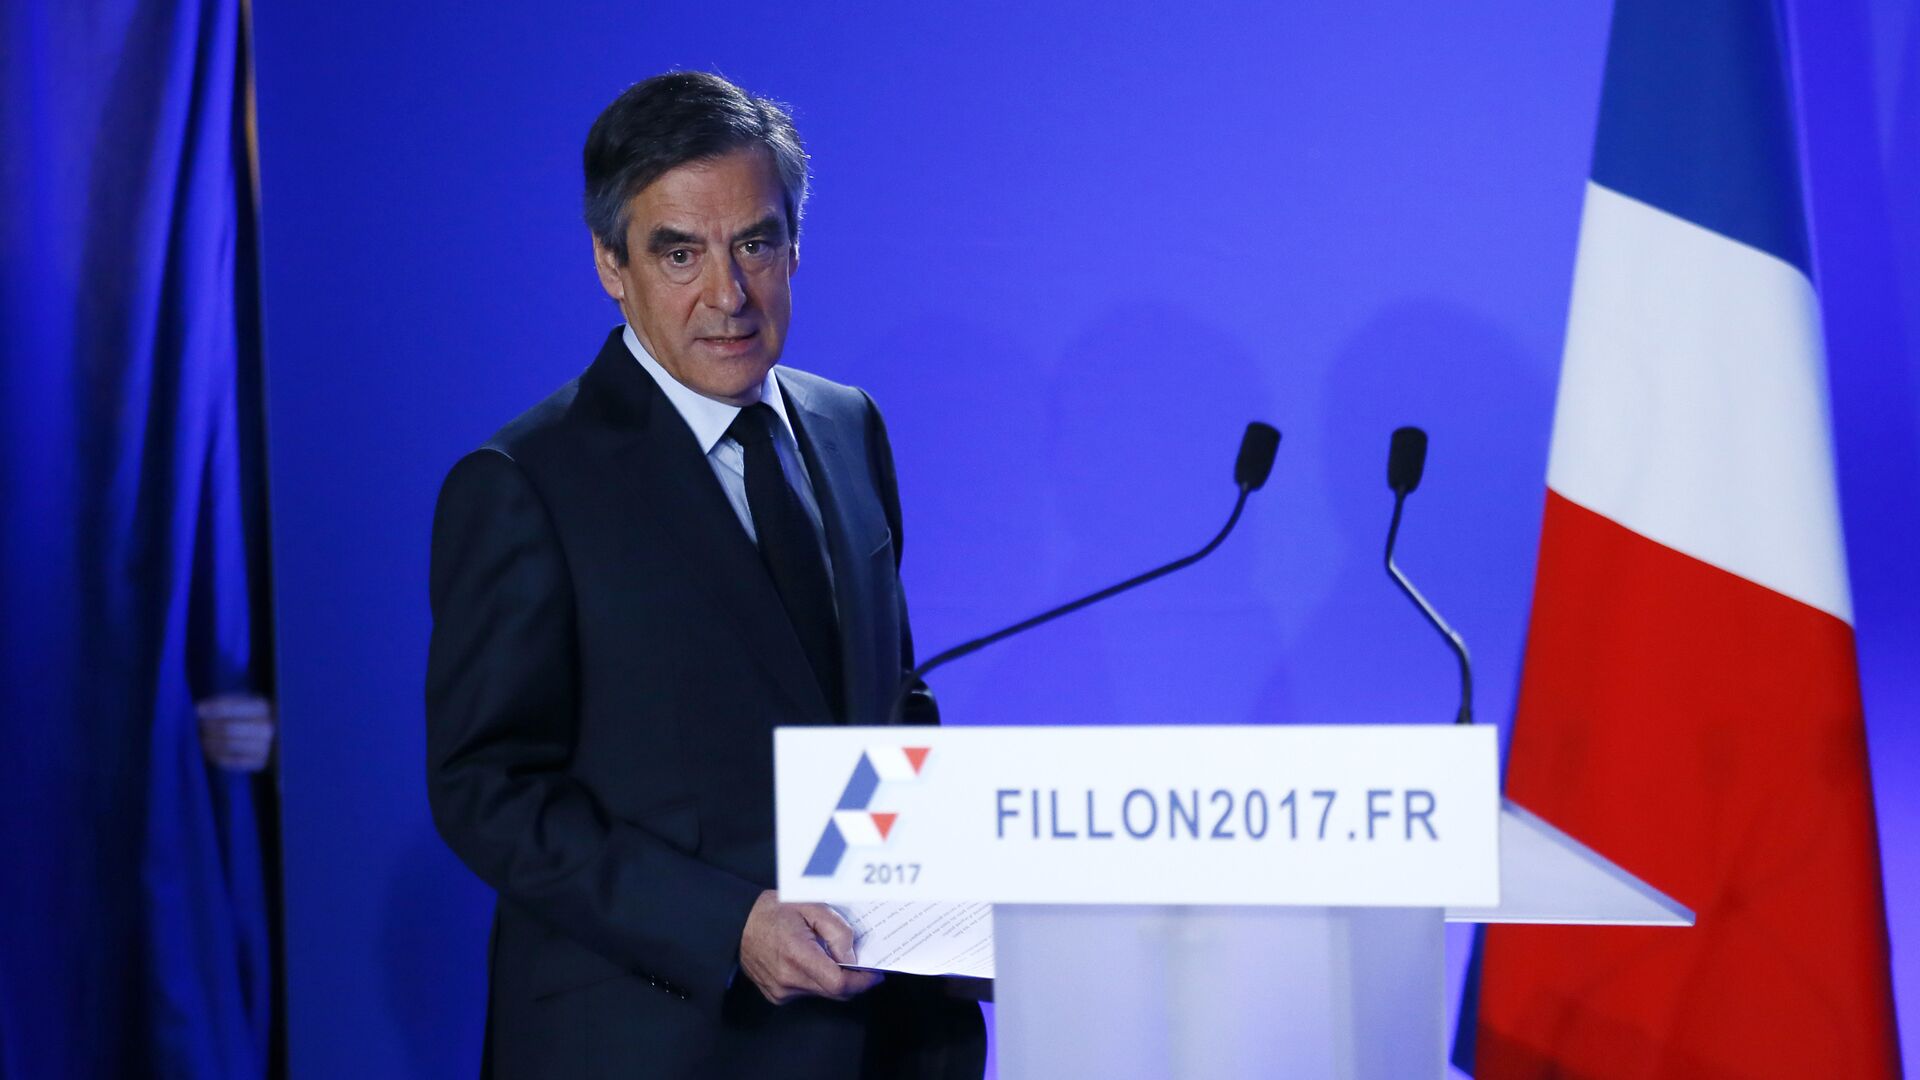 Conservative presidential candidate Francois Fillon arrives to deliver his speech at his campaign headquarters in Paris, Wednesday, March 1, 2017 - Sputnik International, 1920, 09.05.2022